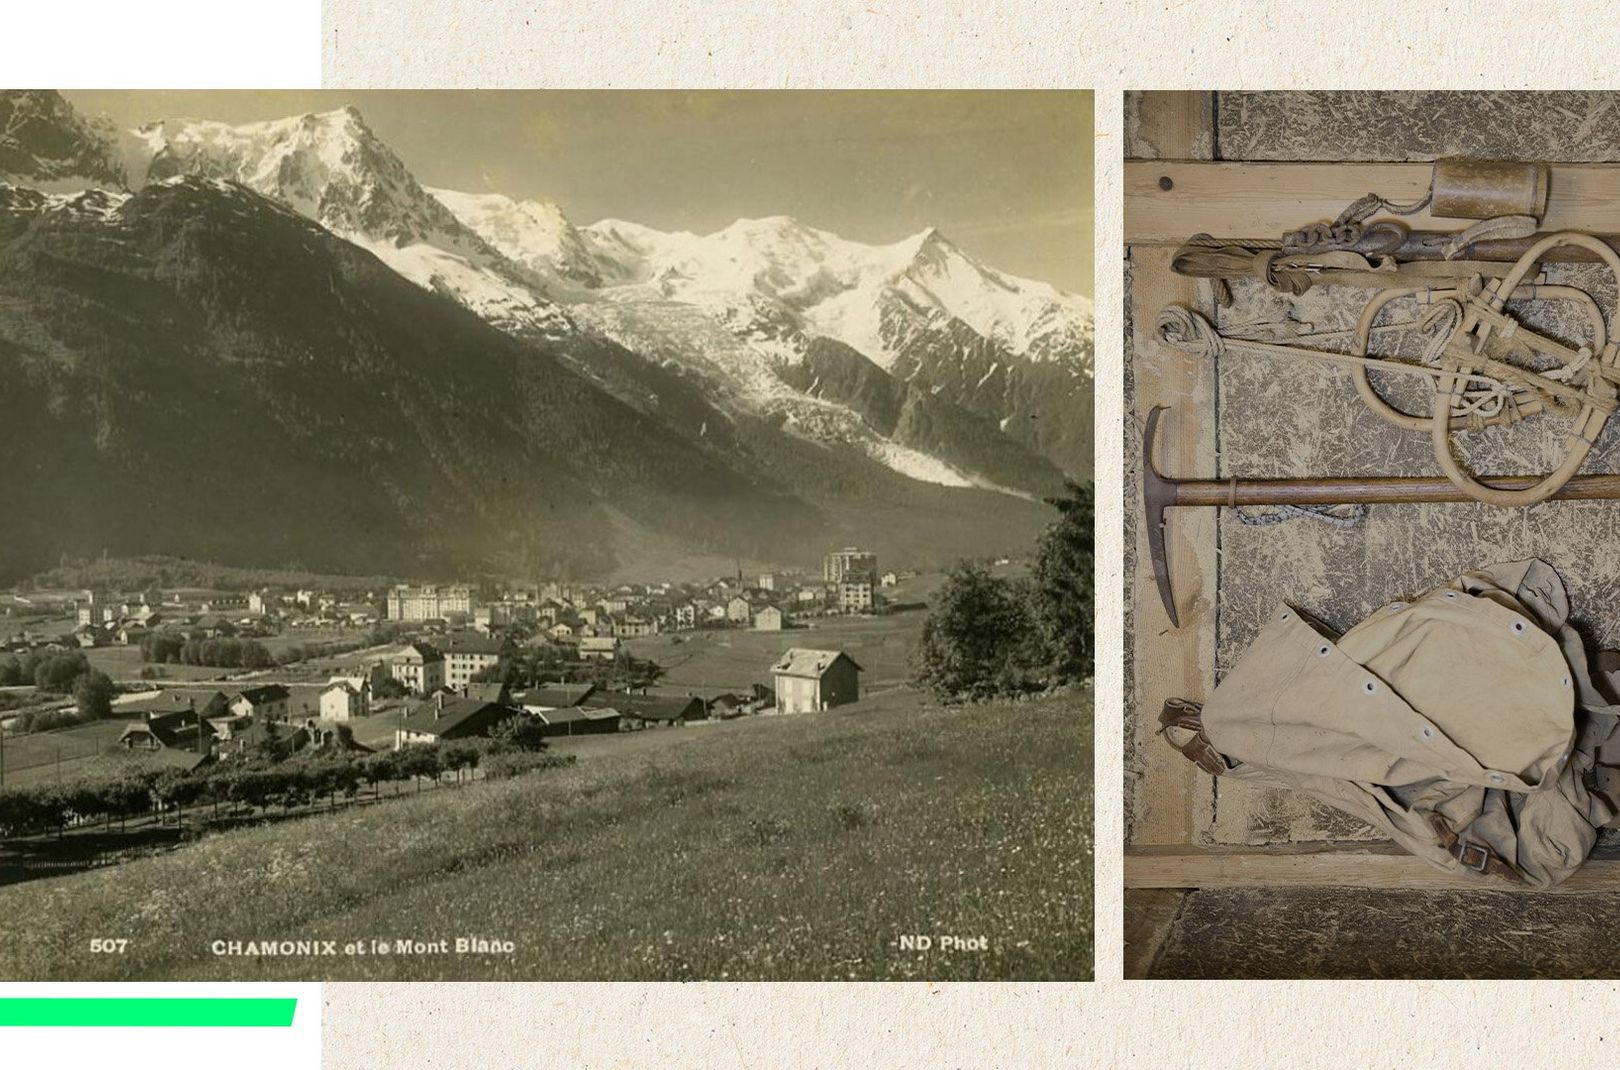 old scrapbook images of Chamonix in France